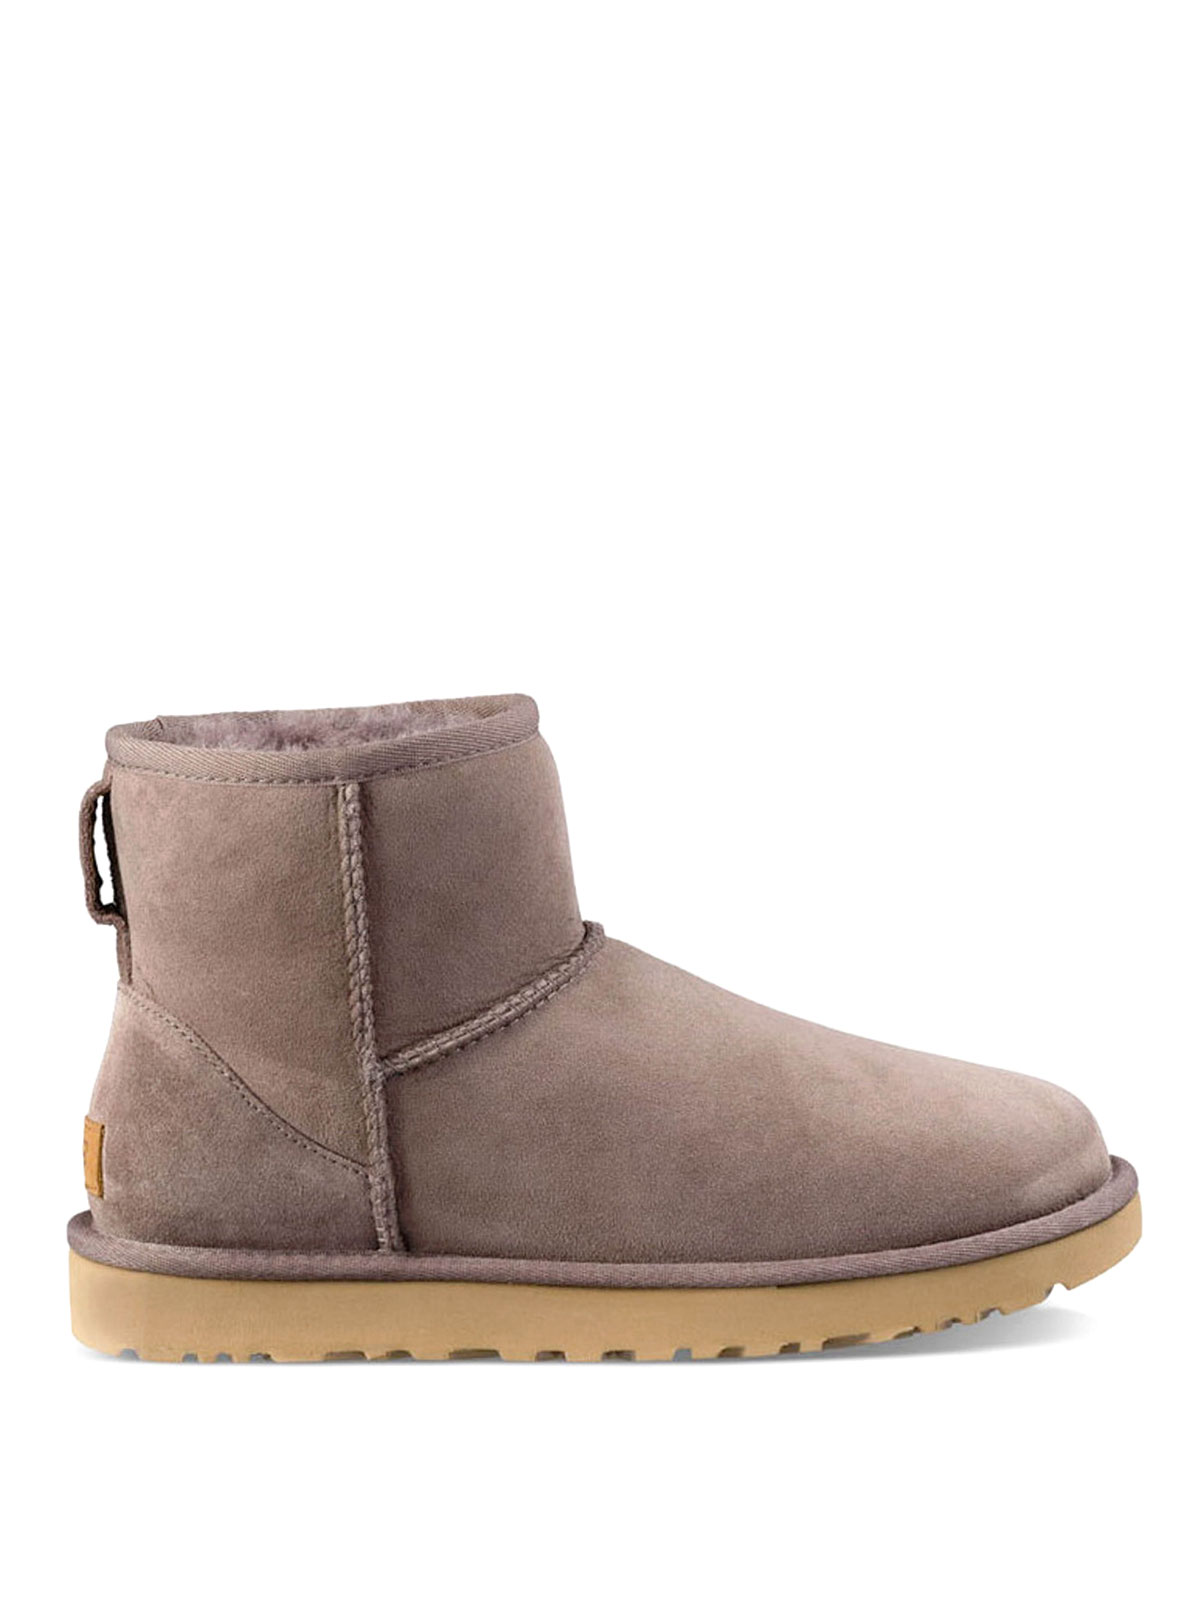 ugg low cut boots